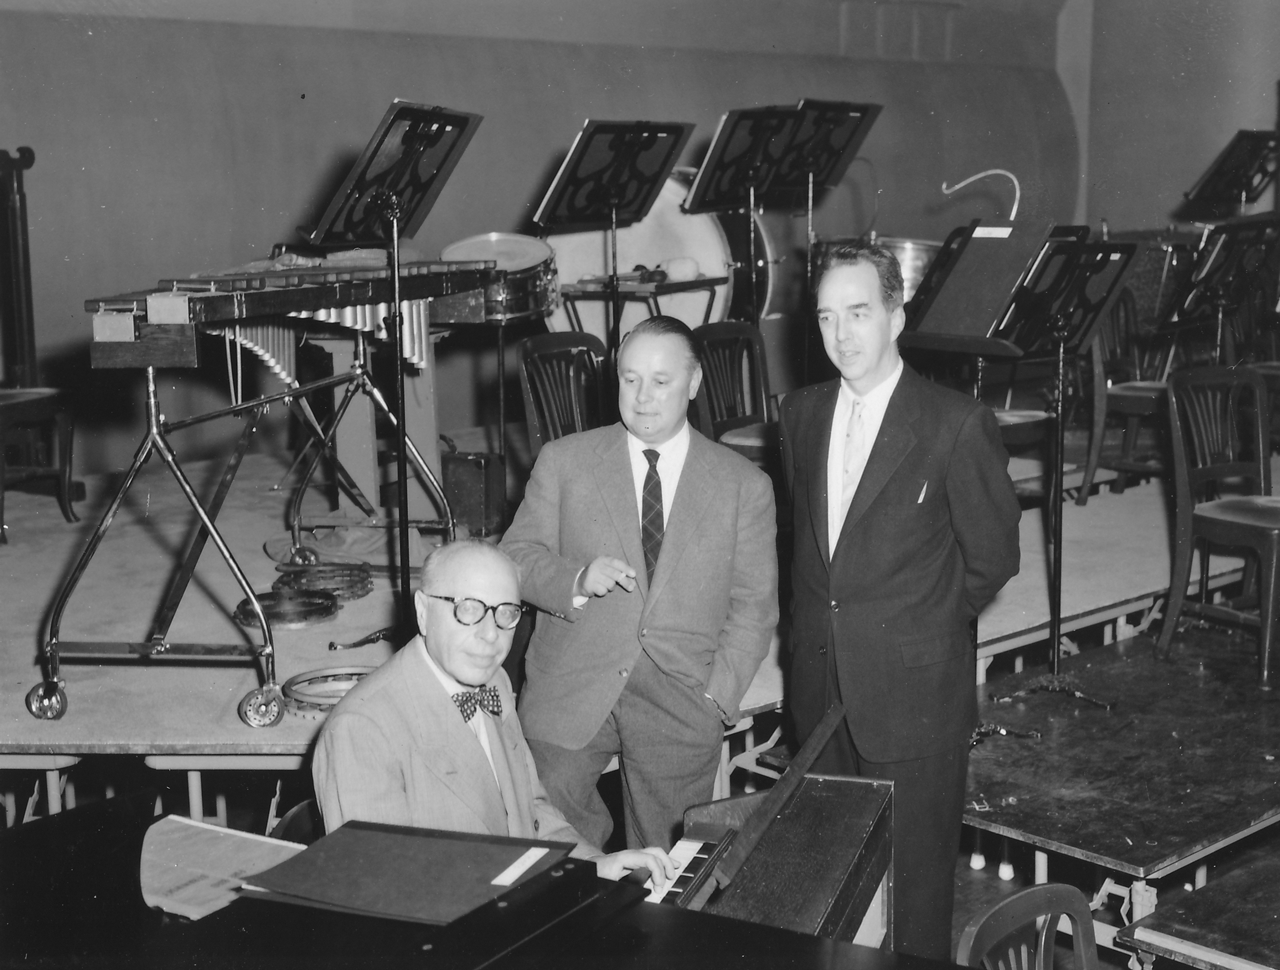 George Szell (seated) assessing the new acoustics after the 1958 renovation with acoustician Heinrich Keilholz (middle) and Orchestra manager A. Beverly Barksdale (right).